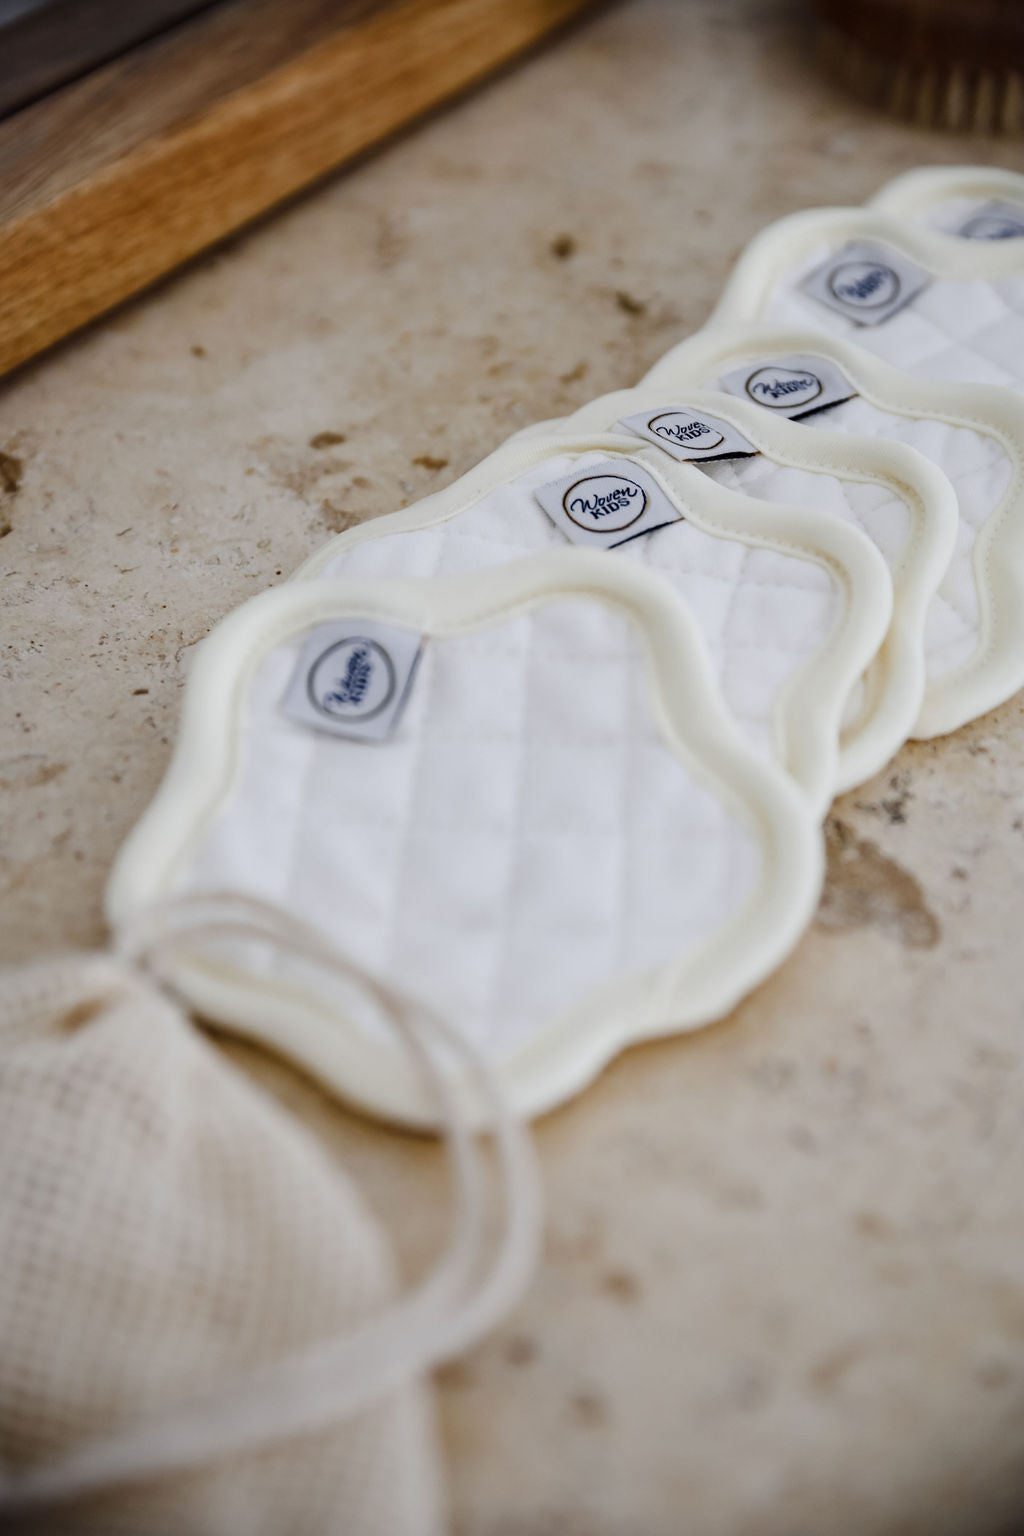 DISCONTINUING PRODUCT* Bamboo/Cotton Reusable Breast Pads